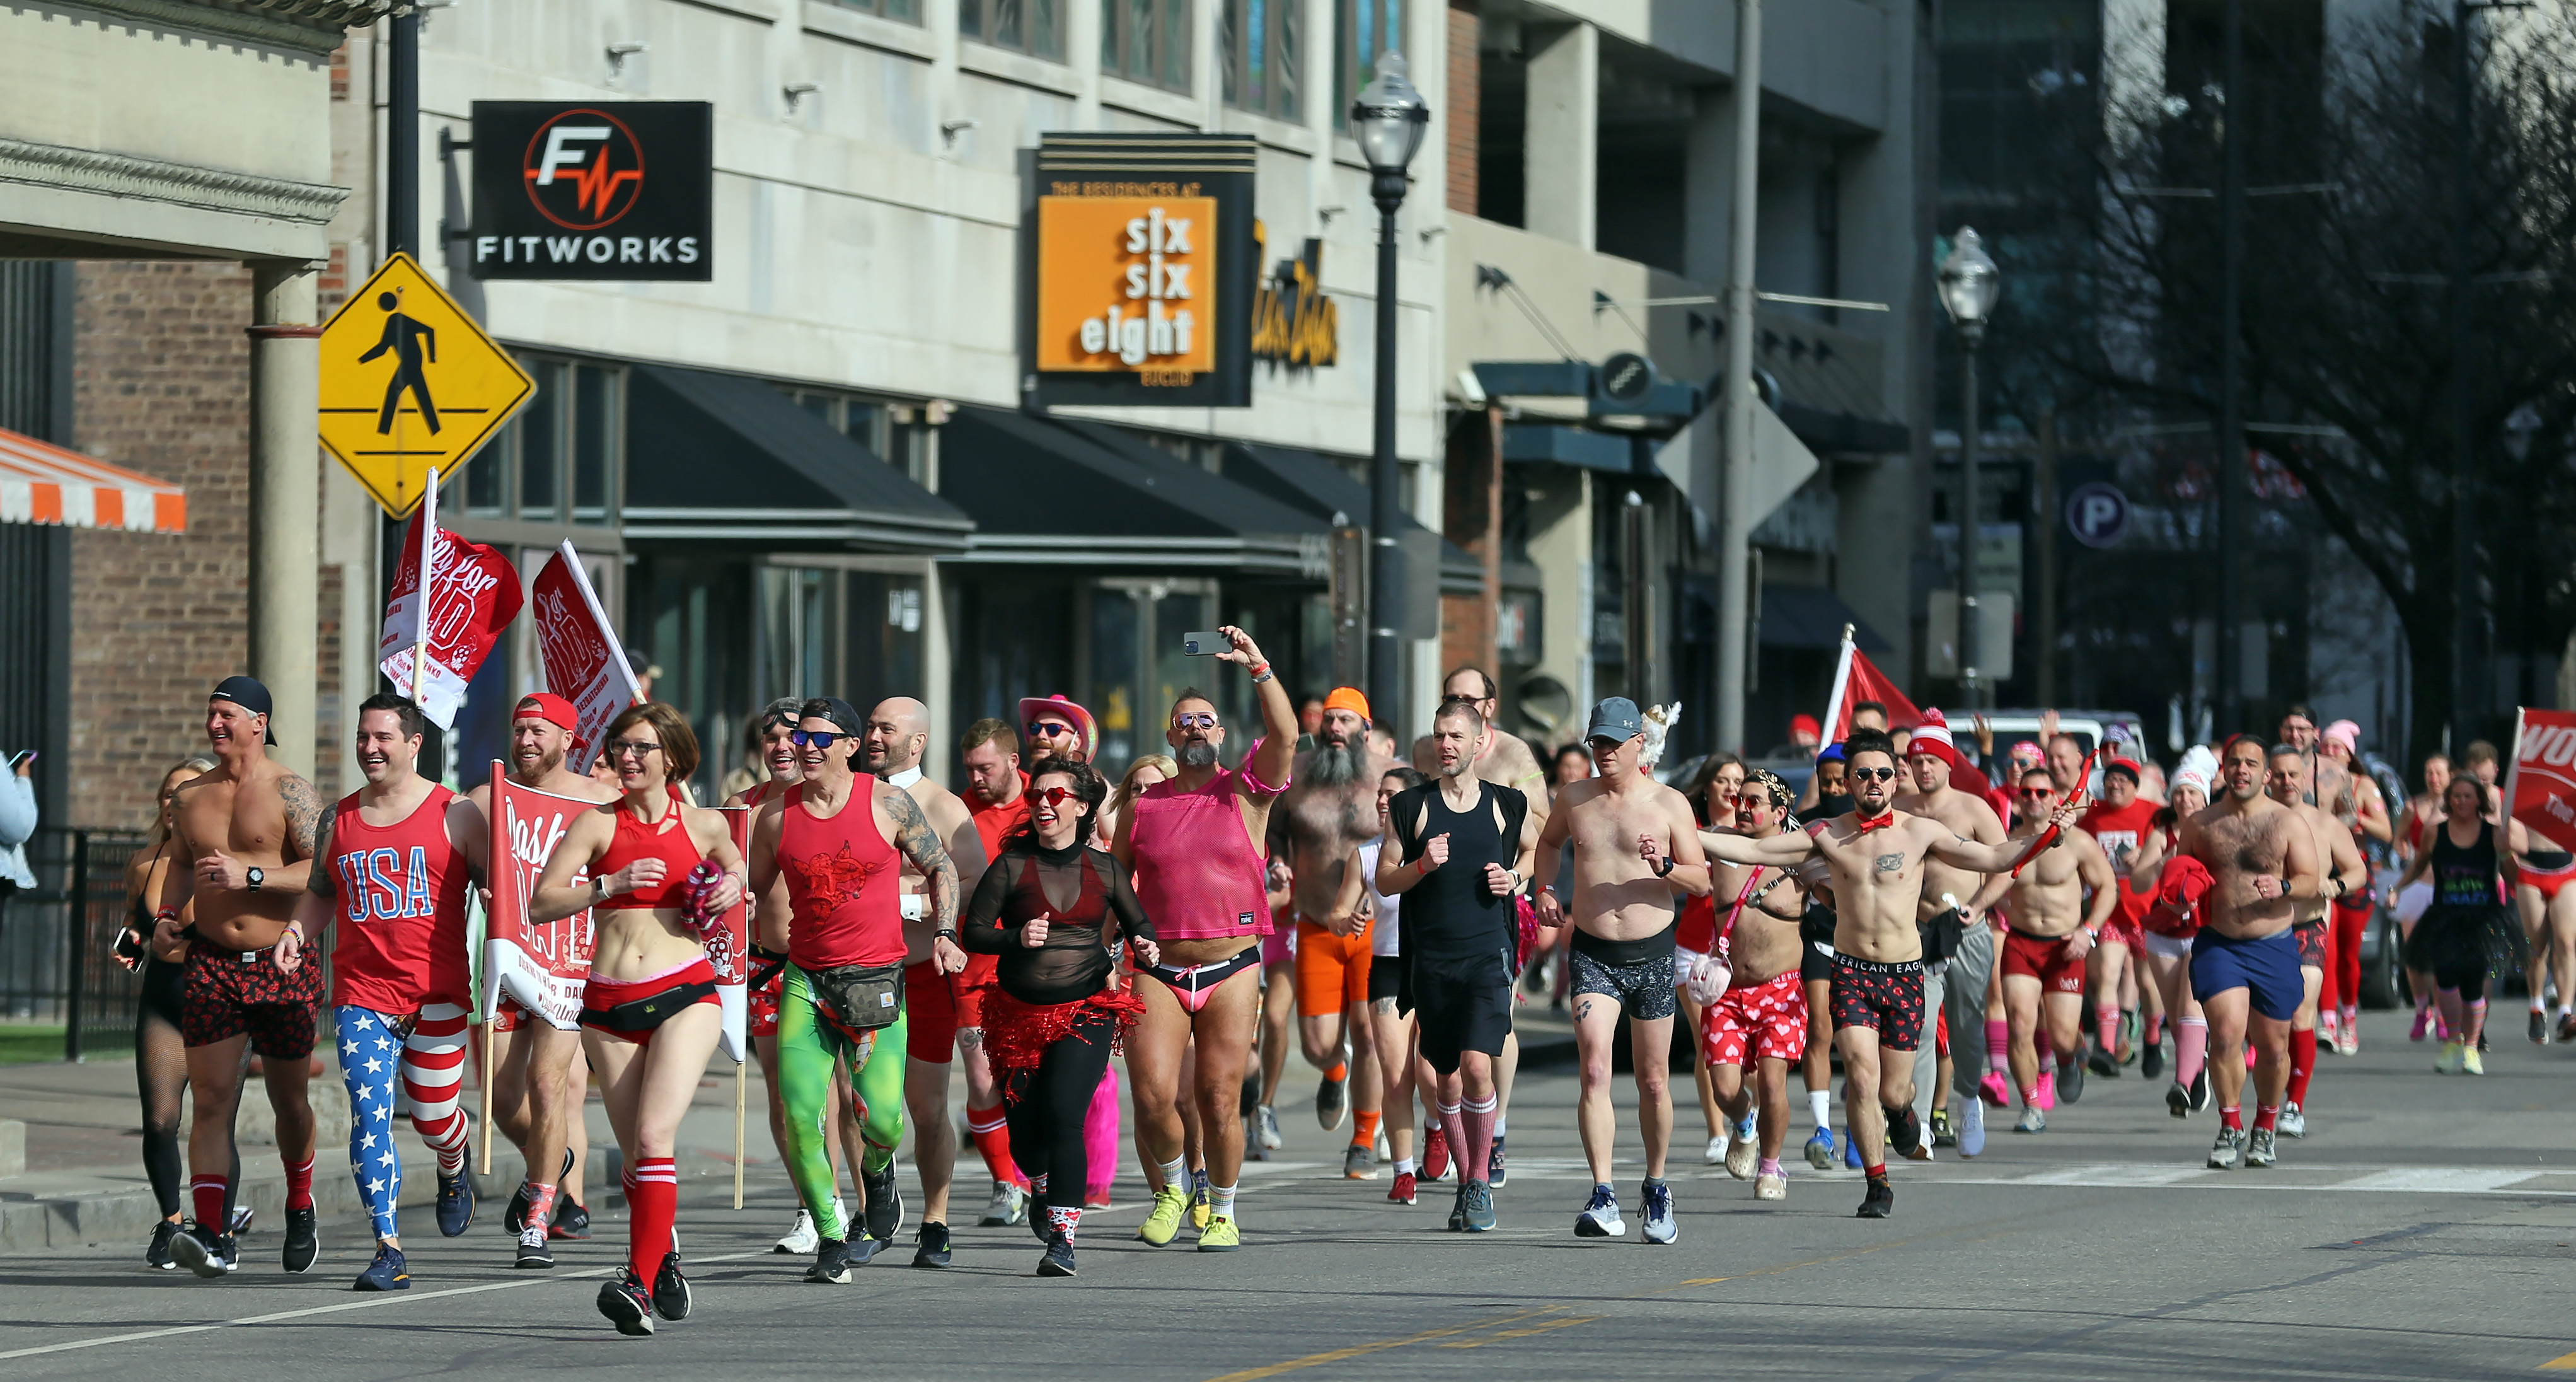 No shirts, no shorts, no problem at annual Cupid's Undie Run in Cleveland  (photos) 